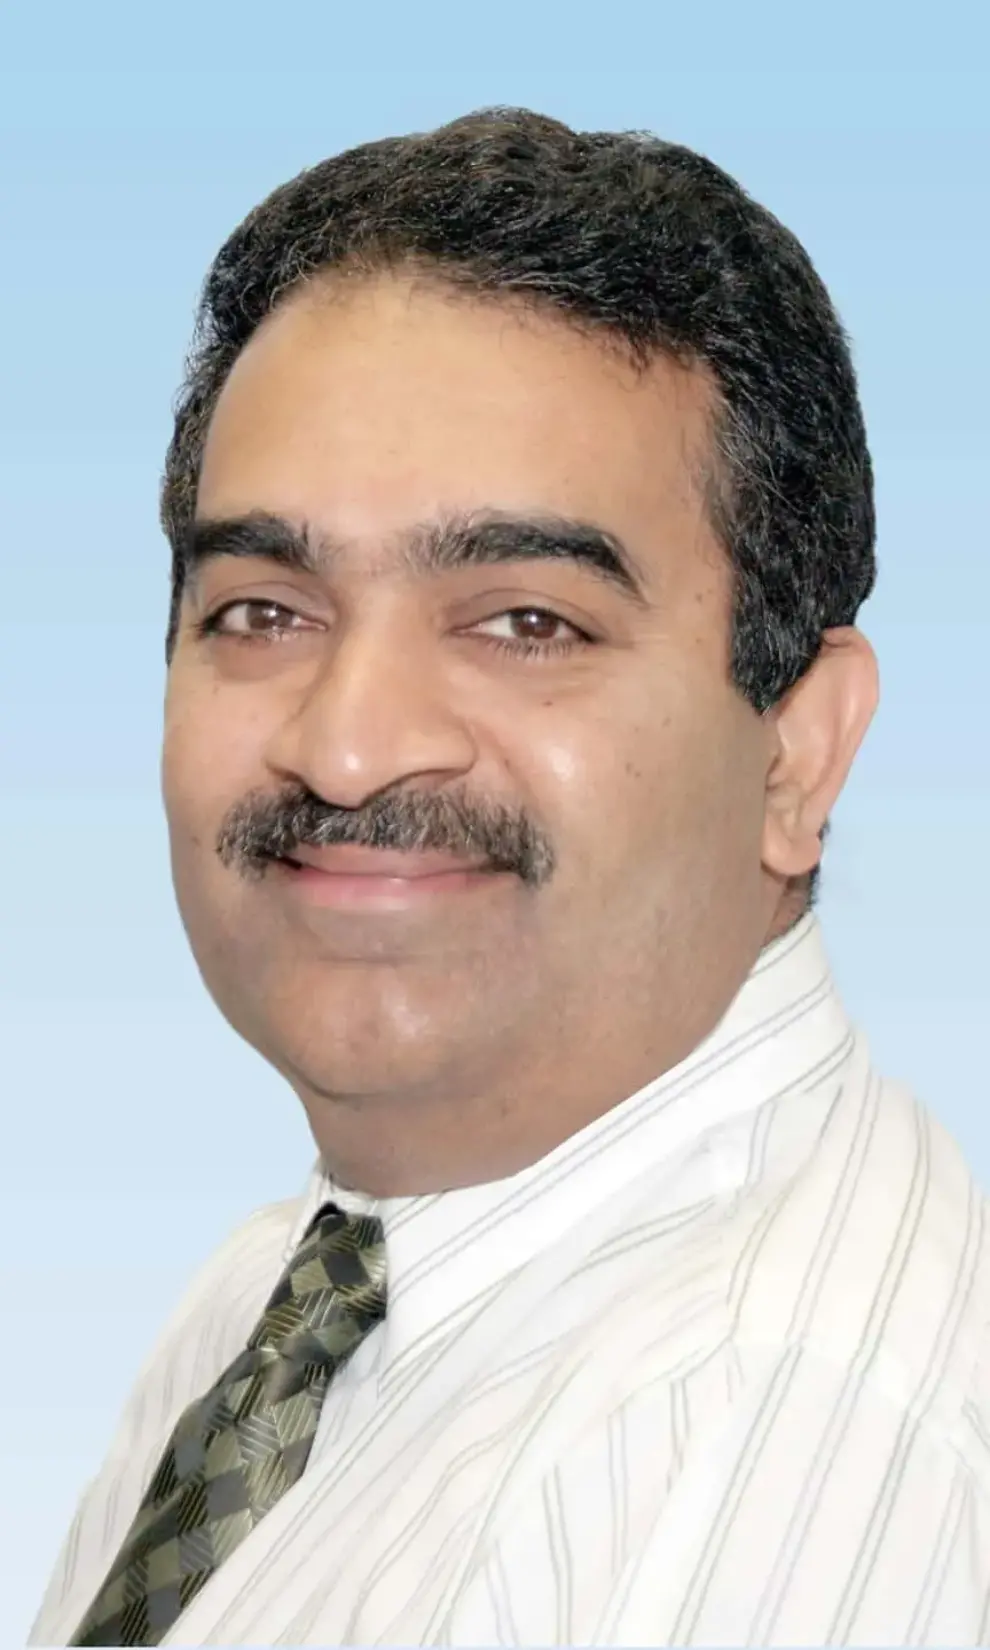 Krishnan to Lead National Maritime Business for WSP USA